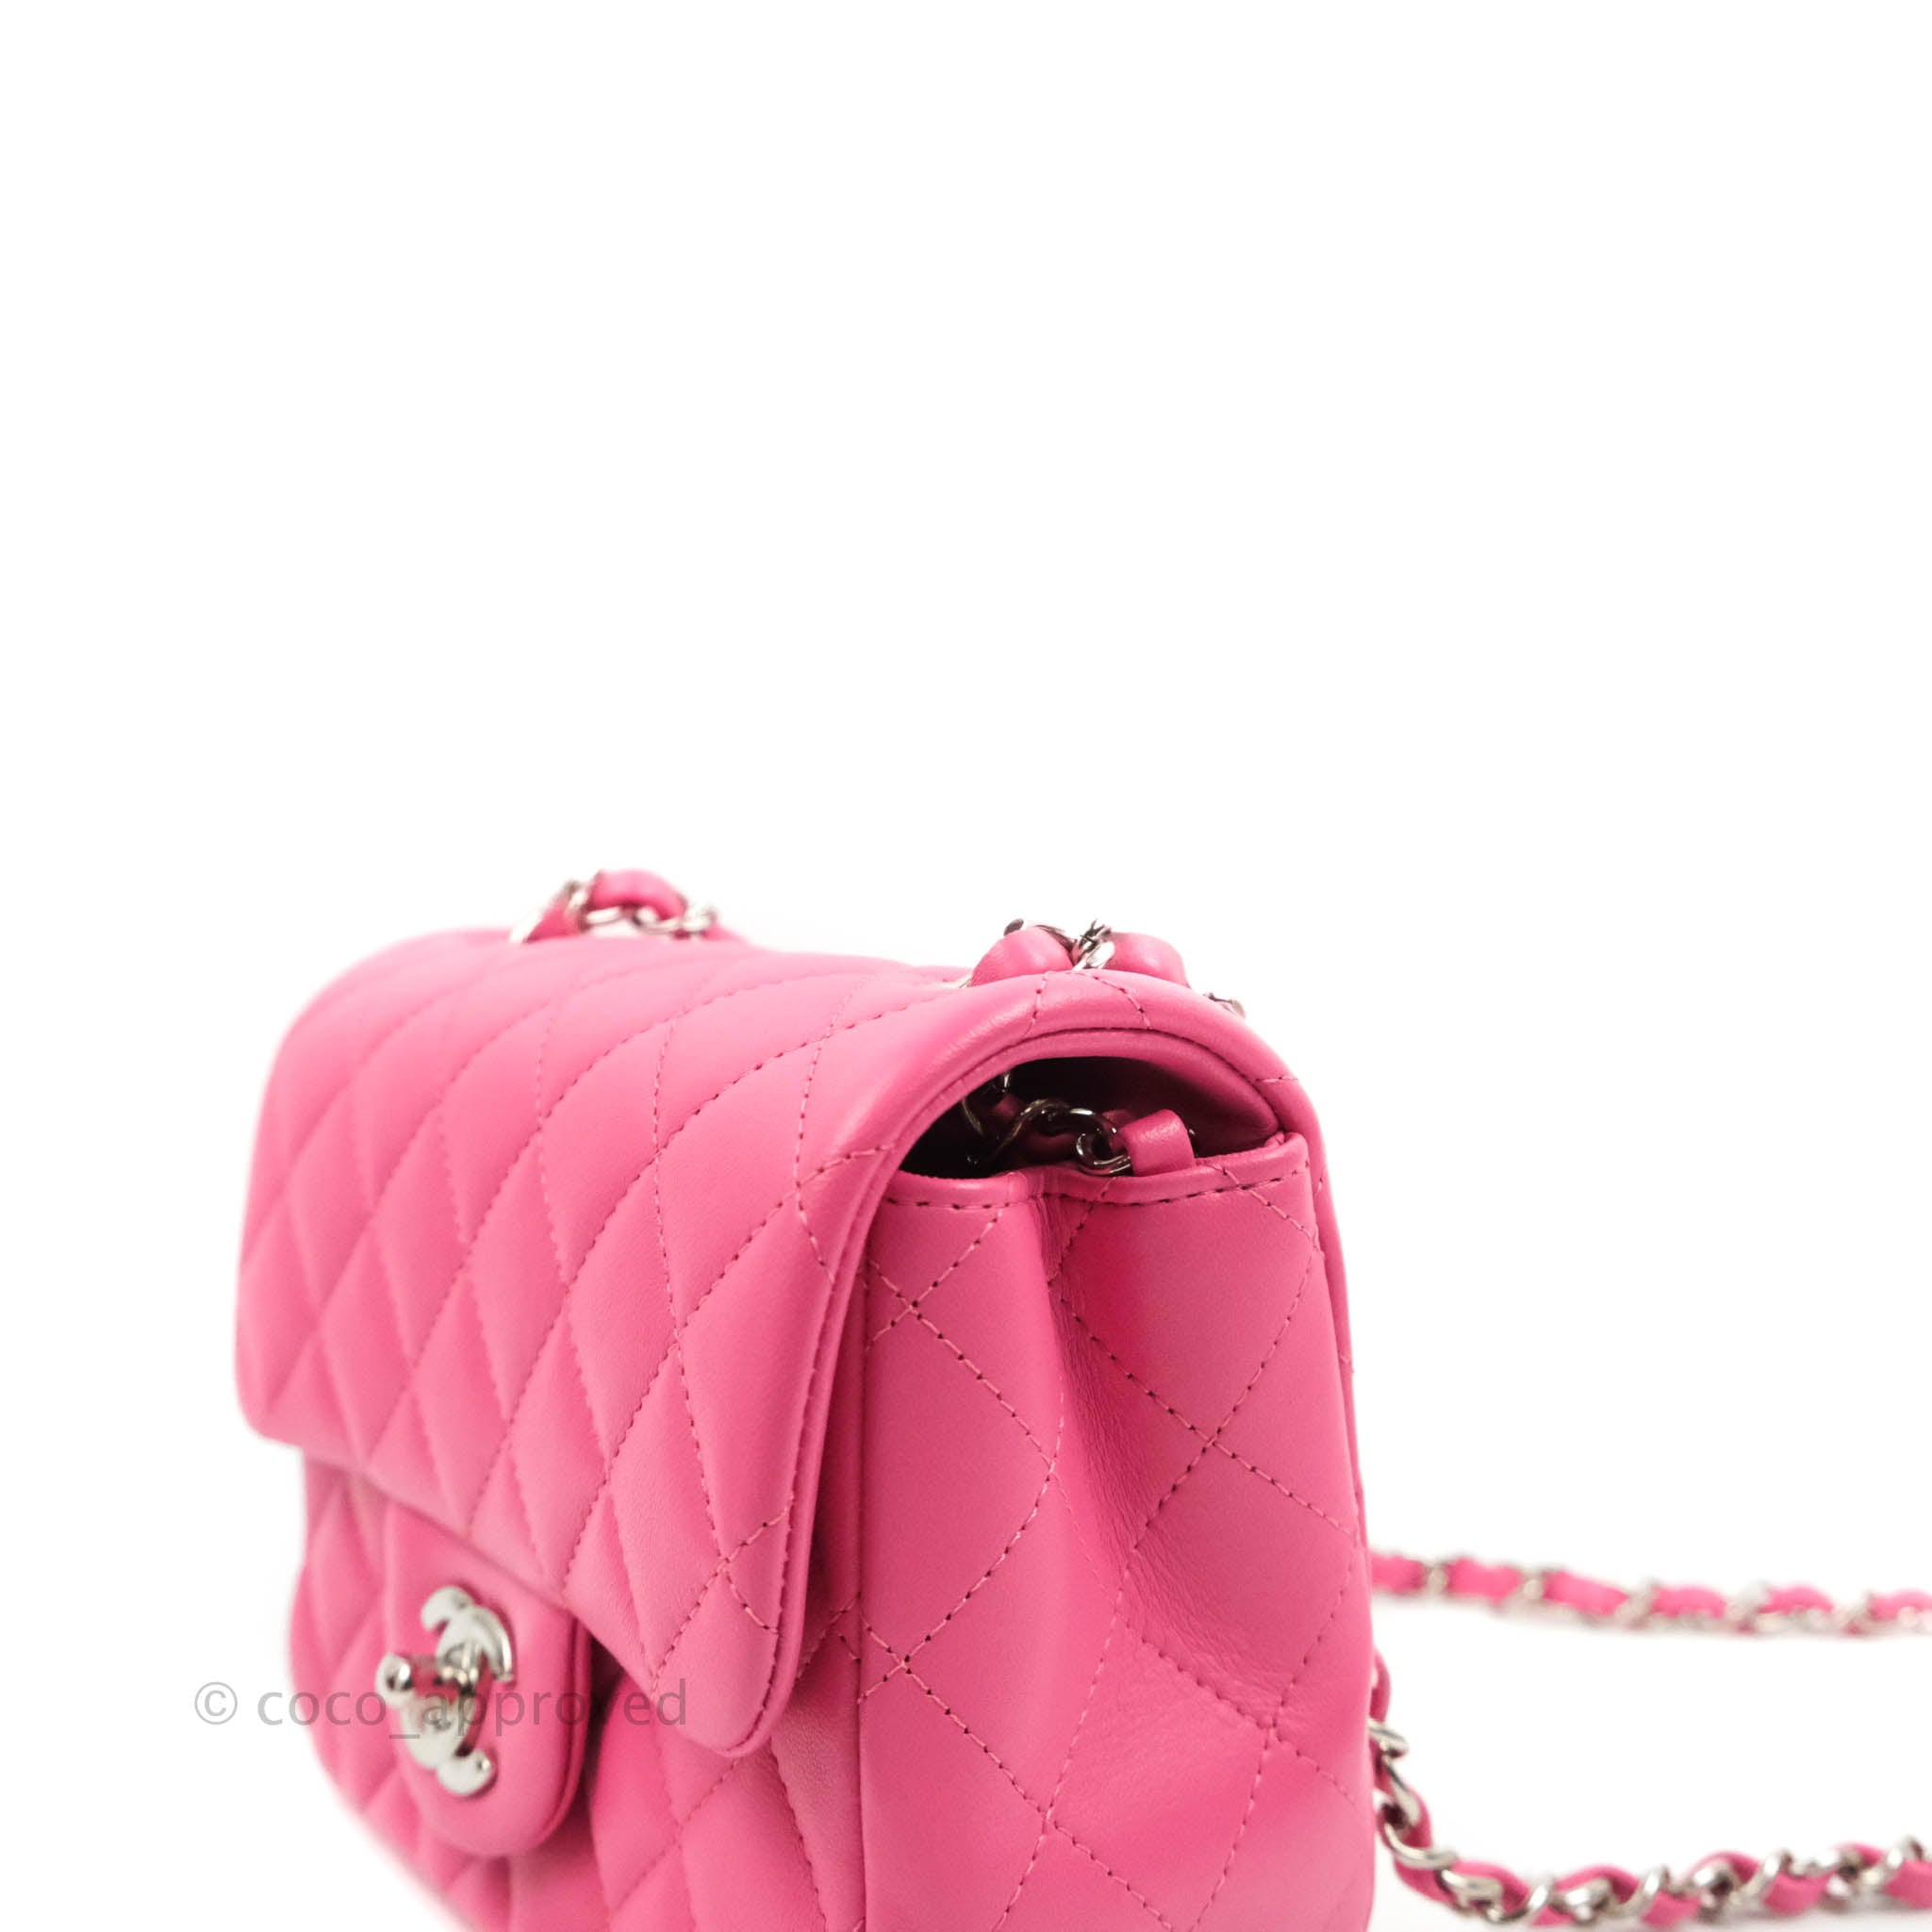 Chanel Mini Flap Bag with Top Handle Pink Crumpled Lambskin Aged Gold – Coco  Approved Studio